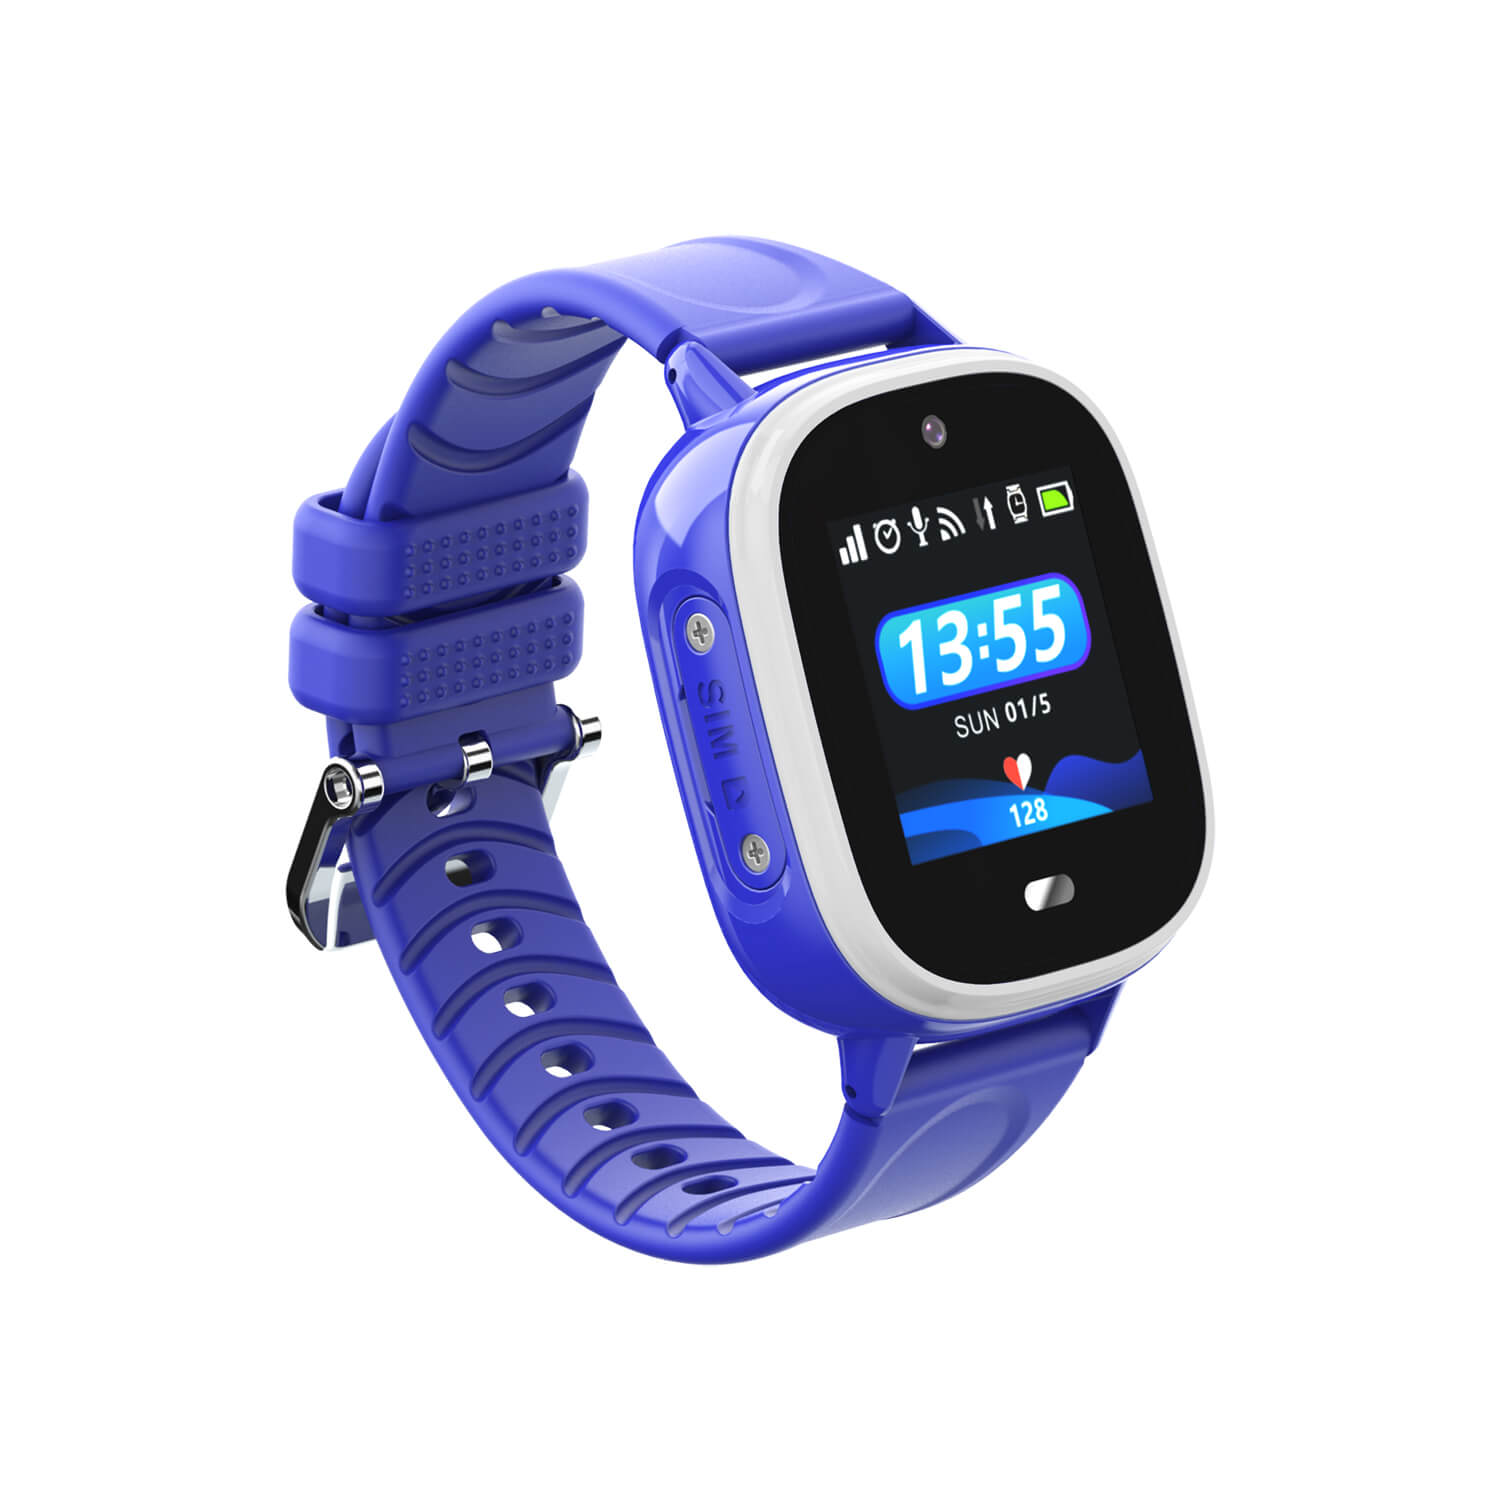 Quality GSM WiFi IP67 Waterproof Smart Child Safety Tracker Watch GPS with Safety Zone Setup for Personal Security D15W